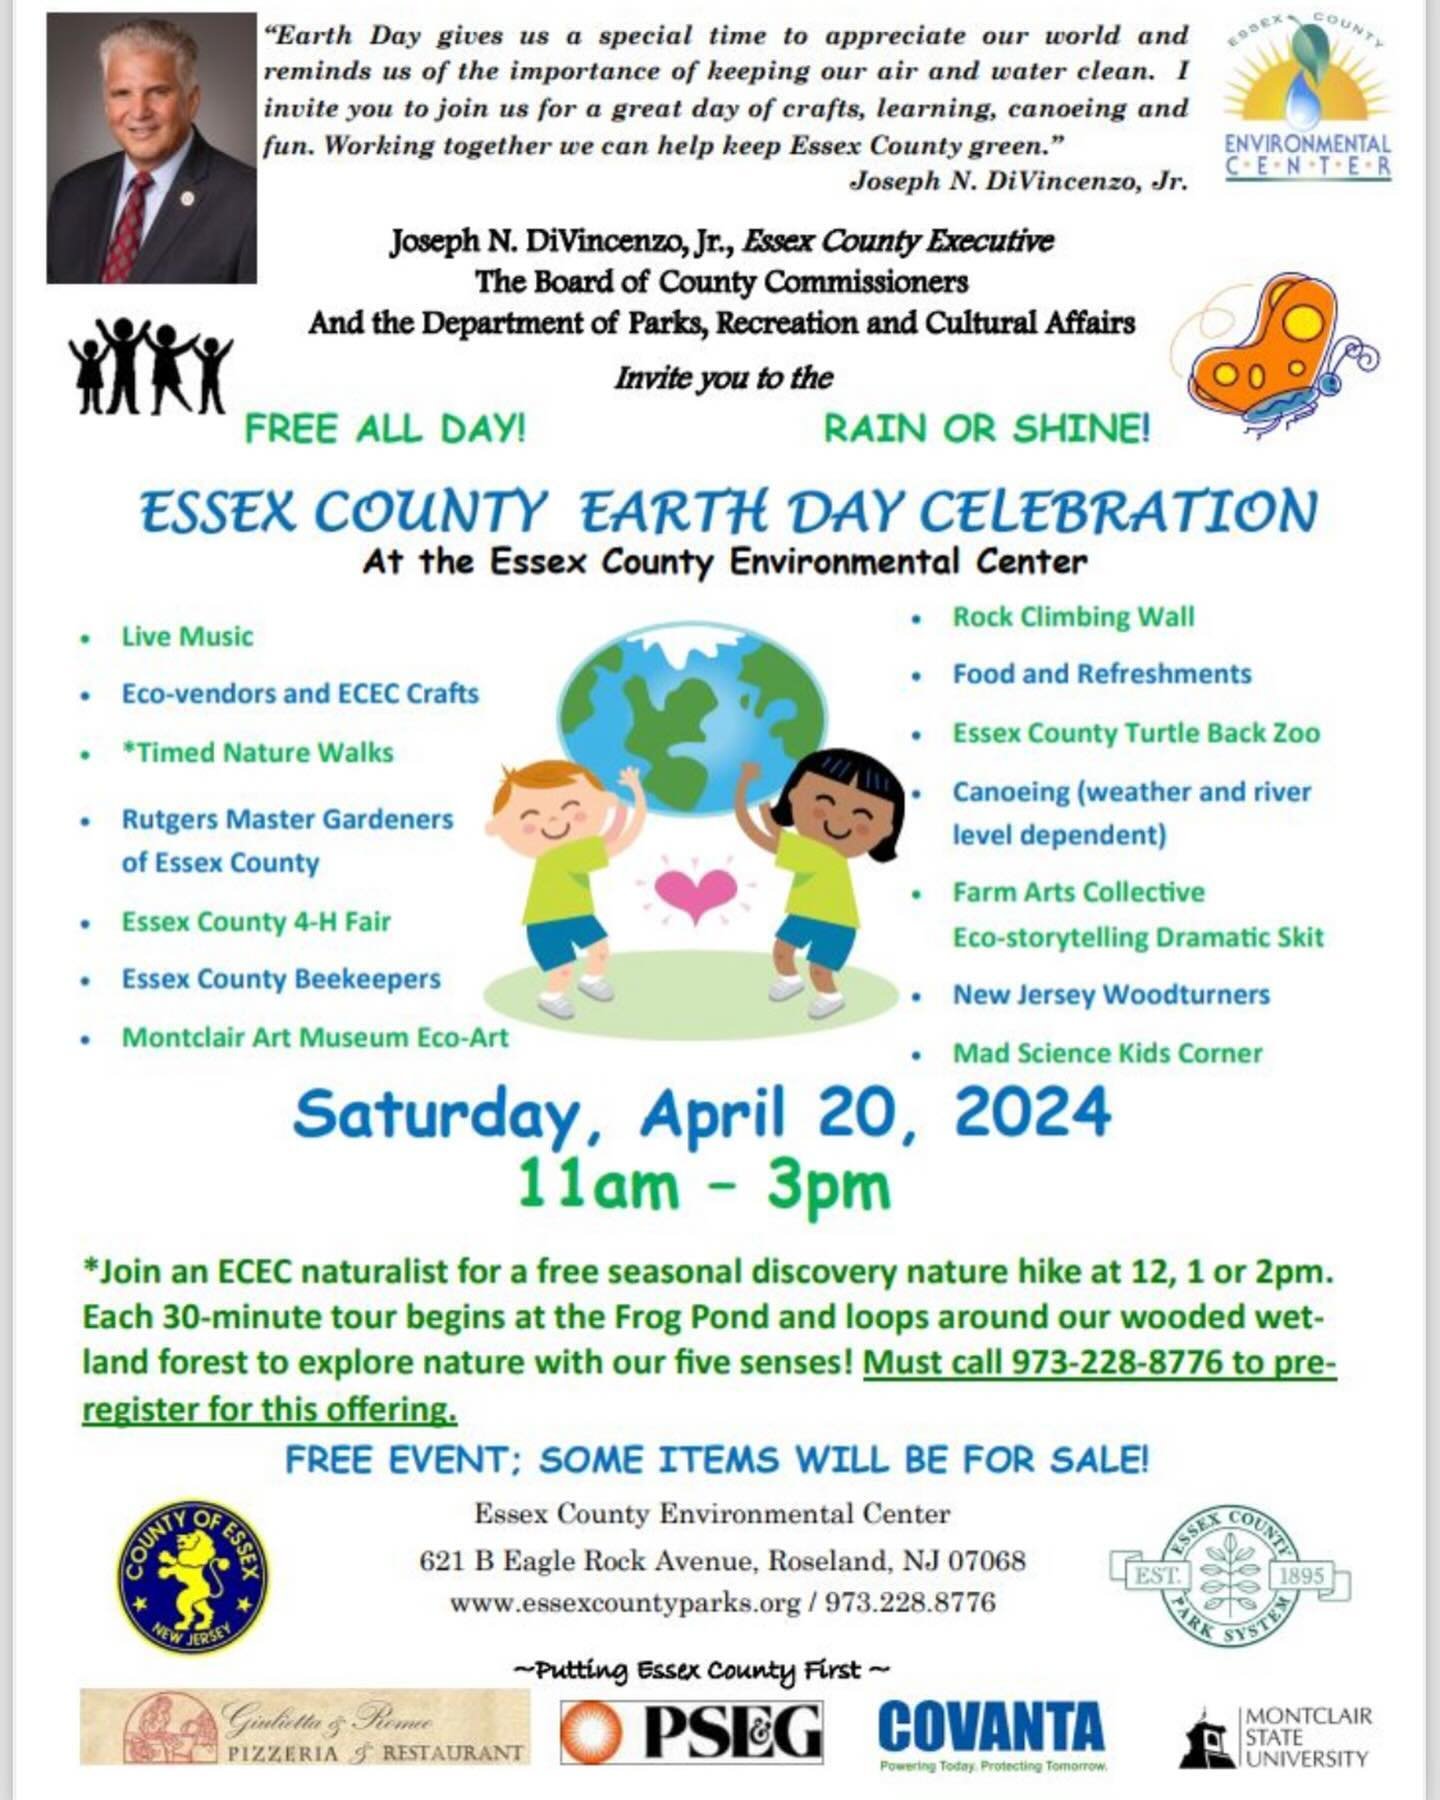 We are super excited to bring Alice in ScienceLand to the Essex County Earth Day Celebration this Saturday! @essexparks 

⏰We will be performing at 12:30p &amp; 1:30p

Come &amp; be a part of this FREE day full of fun activities for the kiddos! 

Cel